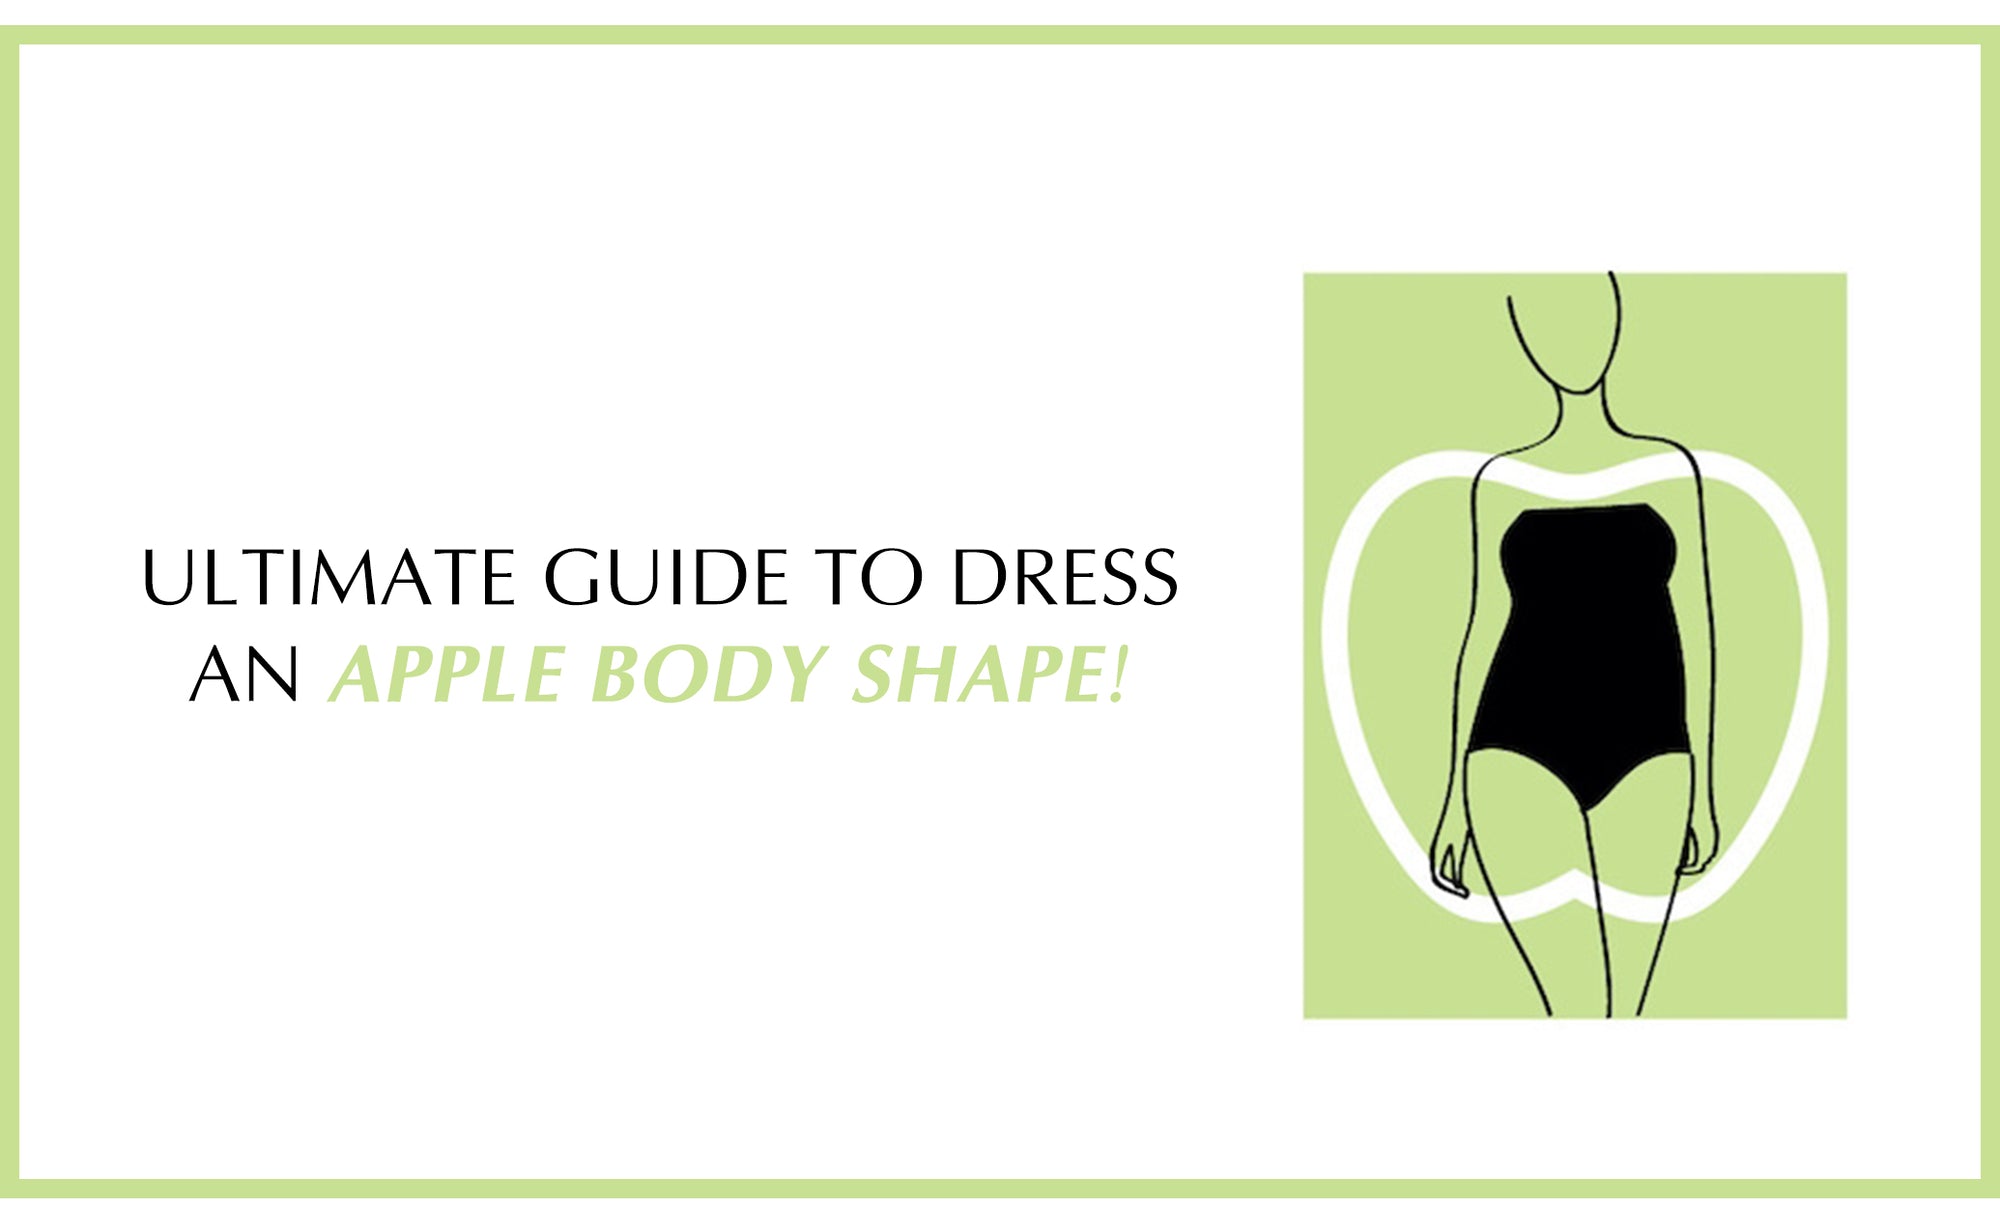 Ultimate guide to dress an Apple body shape!